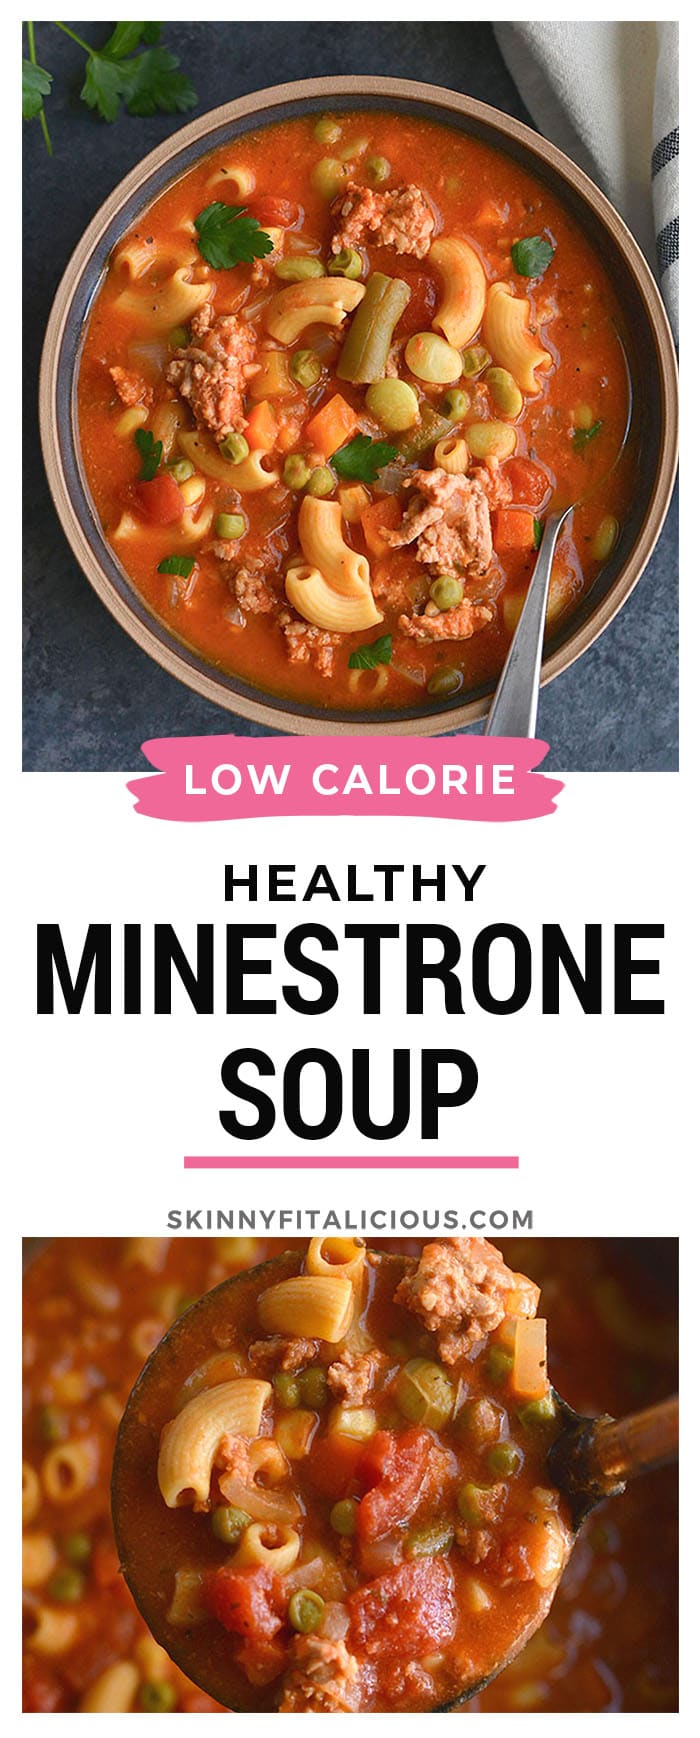 This High Protein Chickpea Minestrone Soup is the best Instant Pot or slow cooker soup! Simple, healthy, delicious and nutritious. Get ready for an amazing tasting soup!